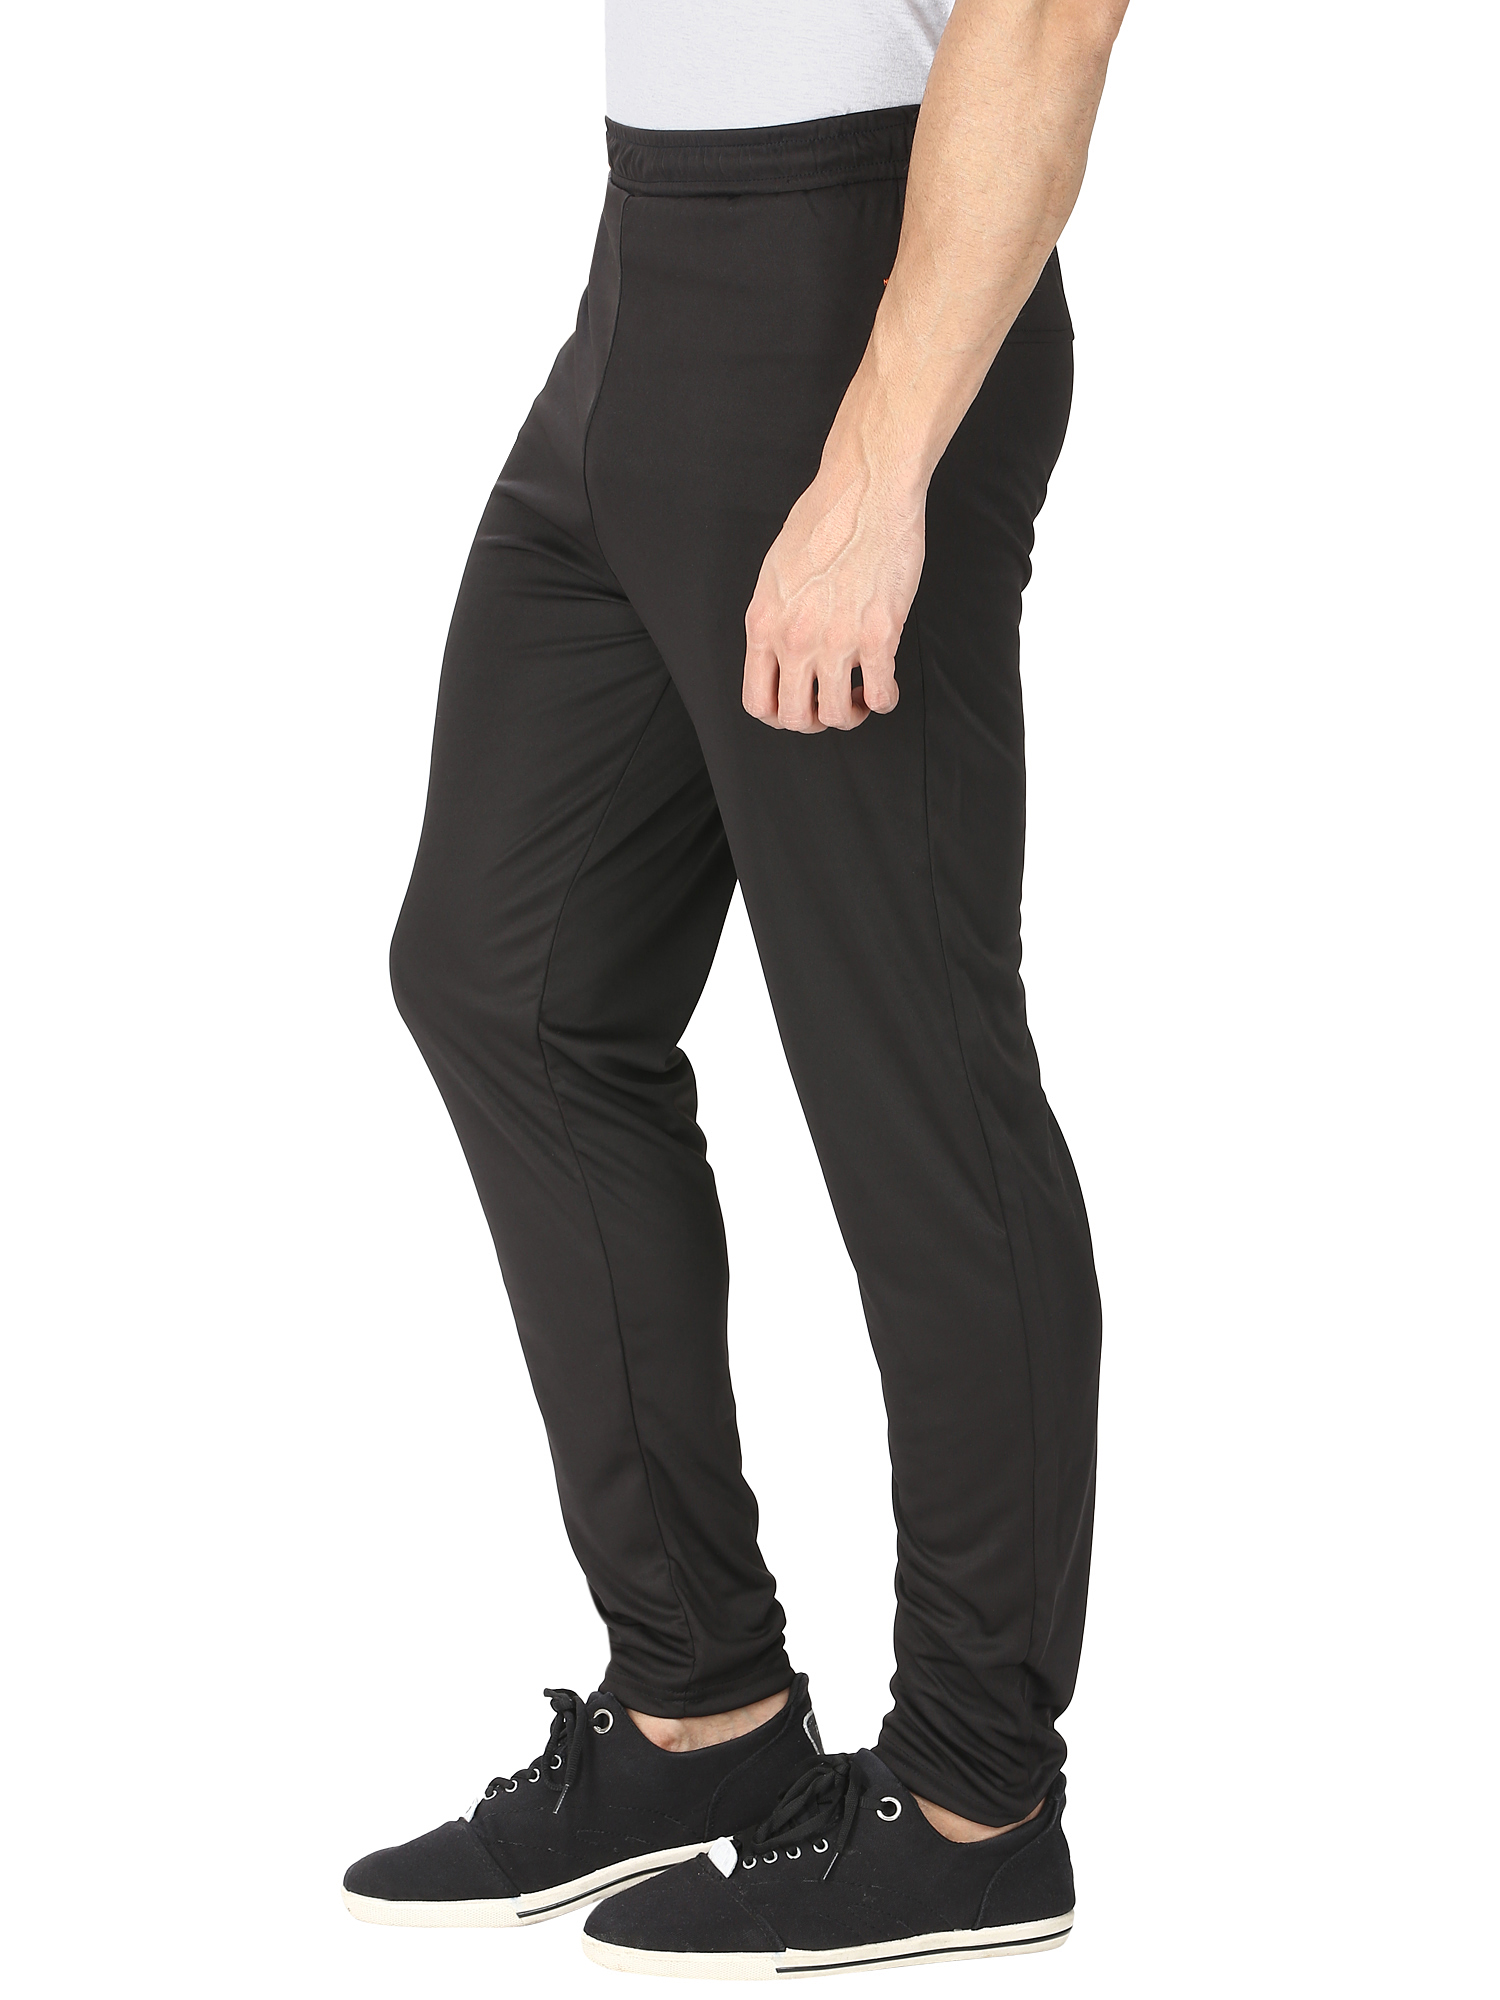 Buy Track Pants Plain From Mens Fashion Zone Online @ ₹635 from ShopClues